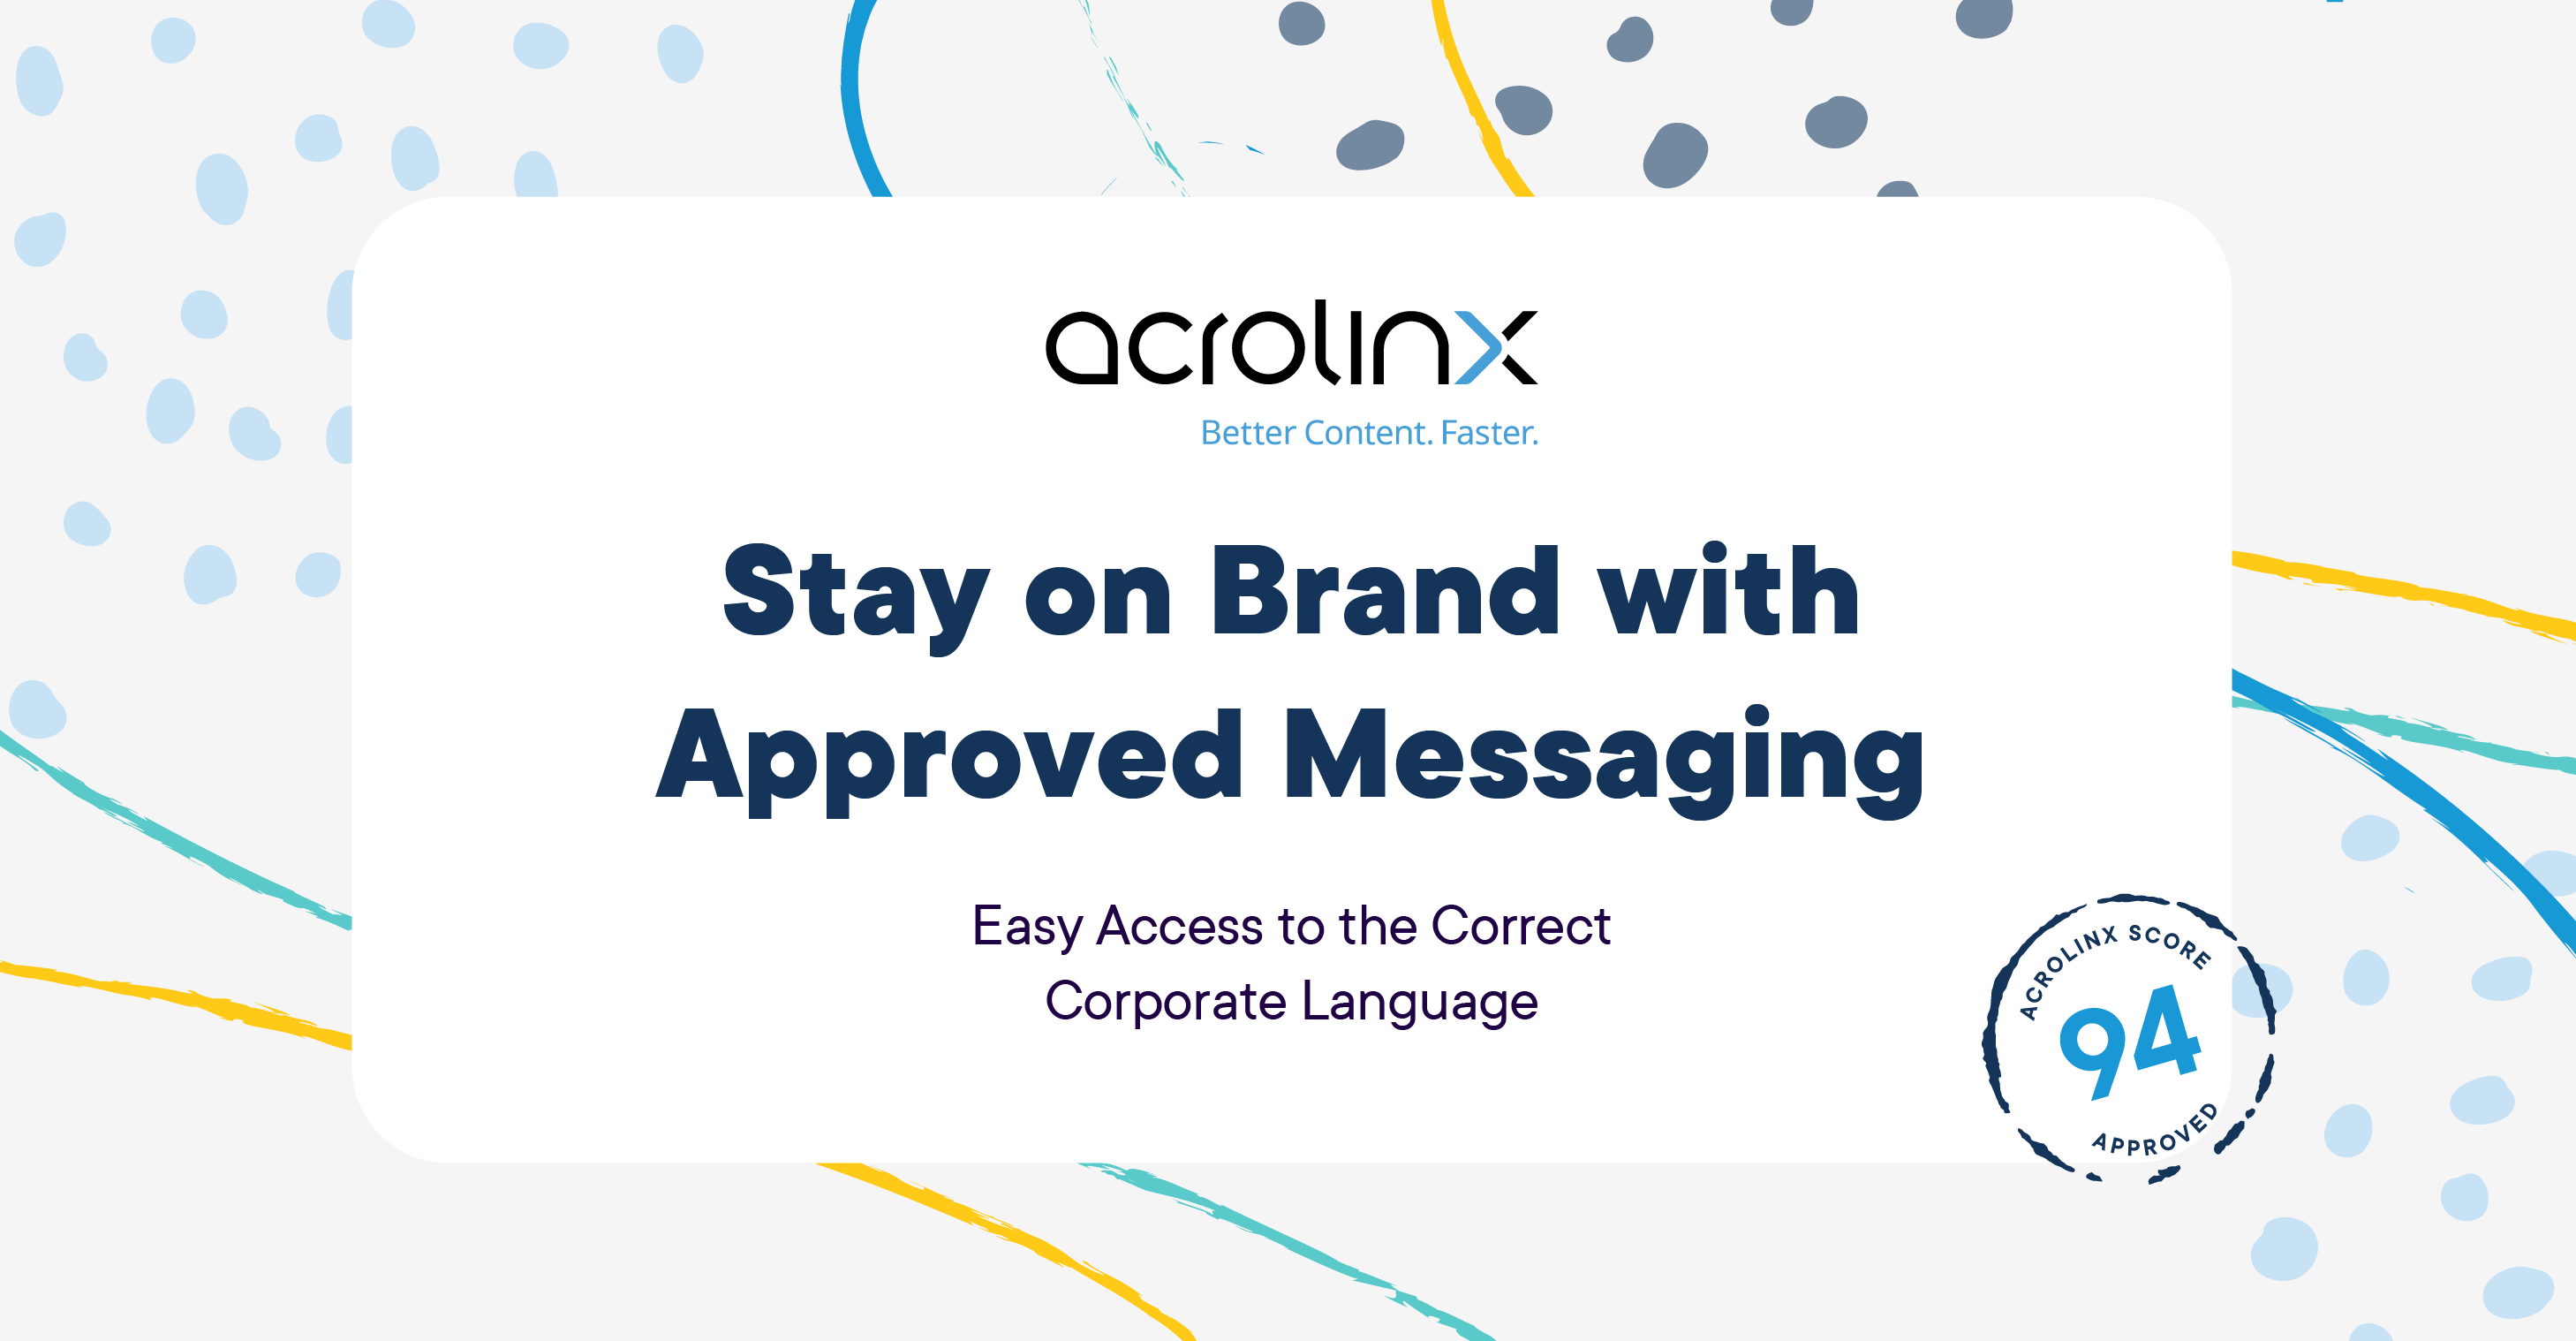 Image for approved messaging brochure.